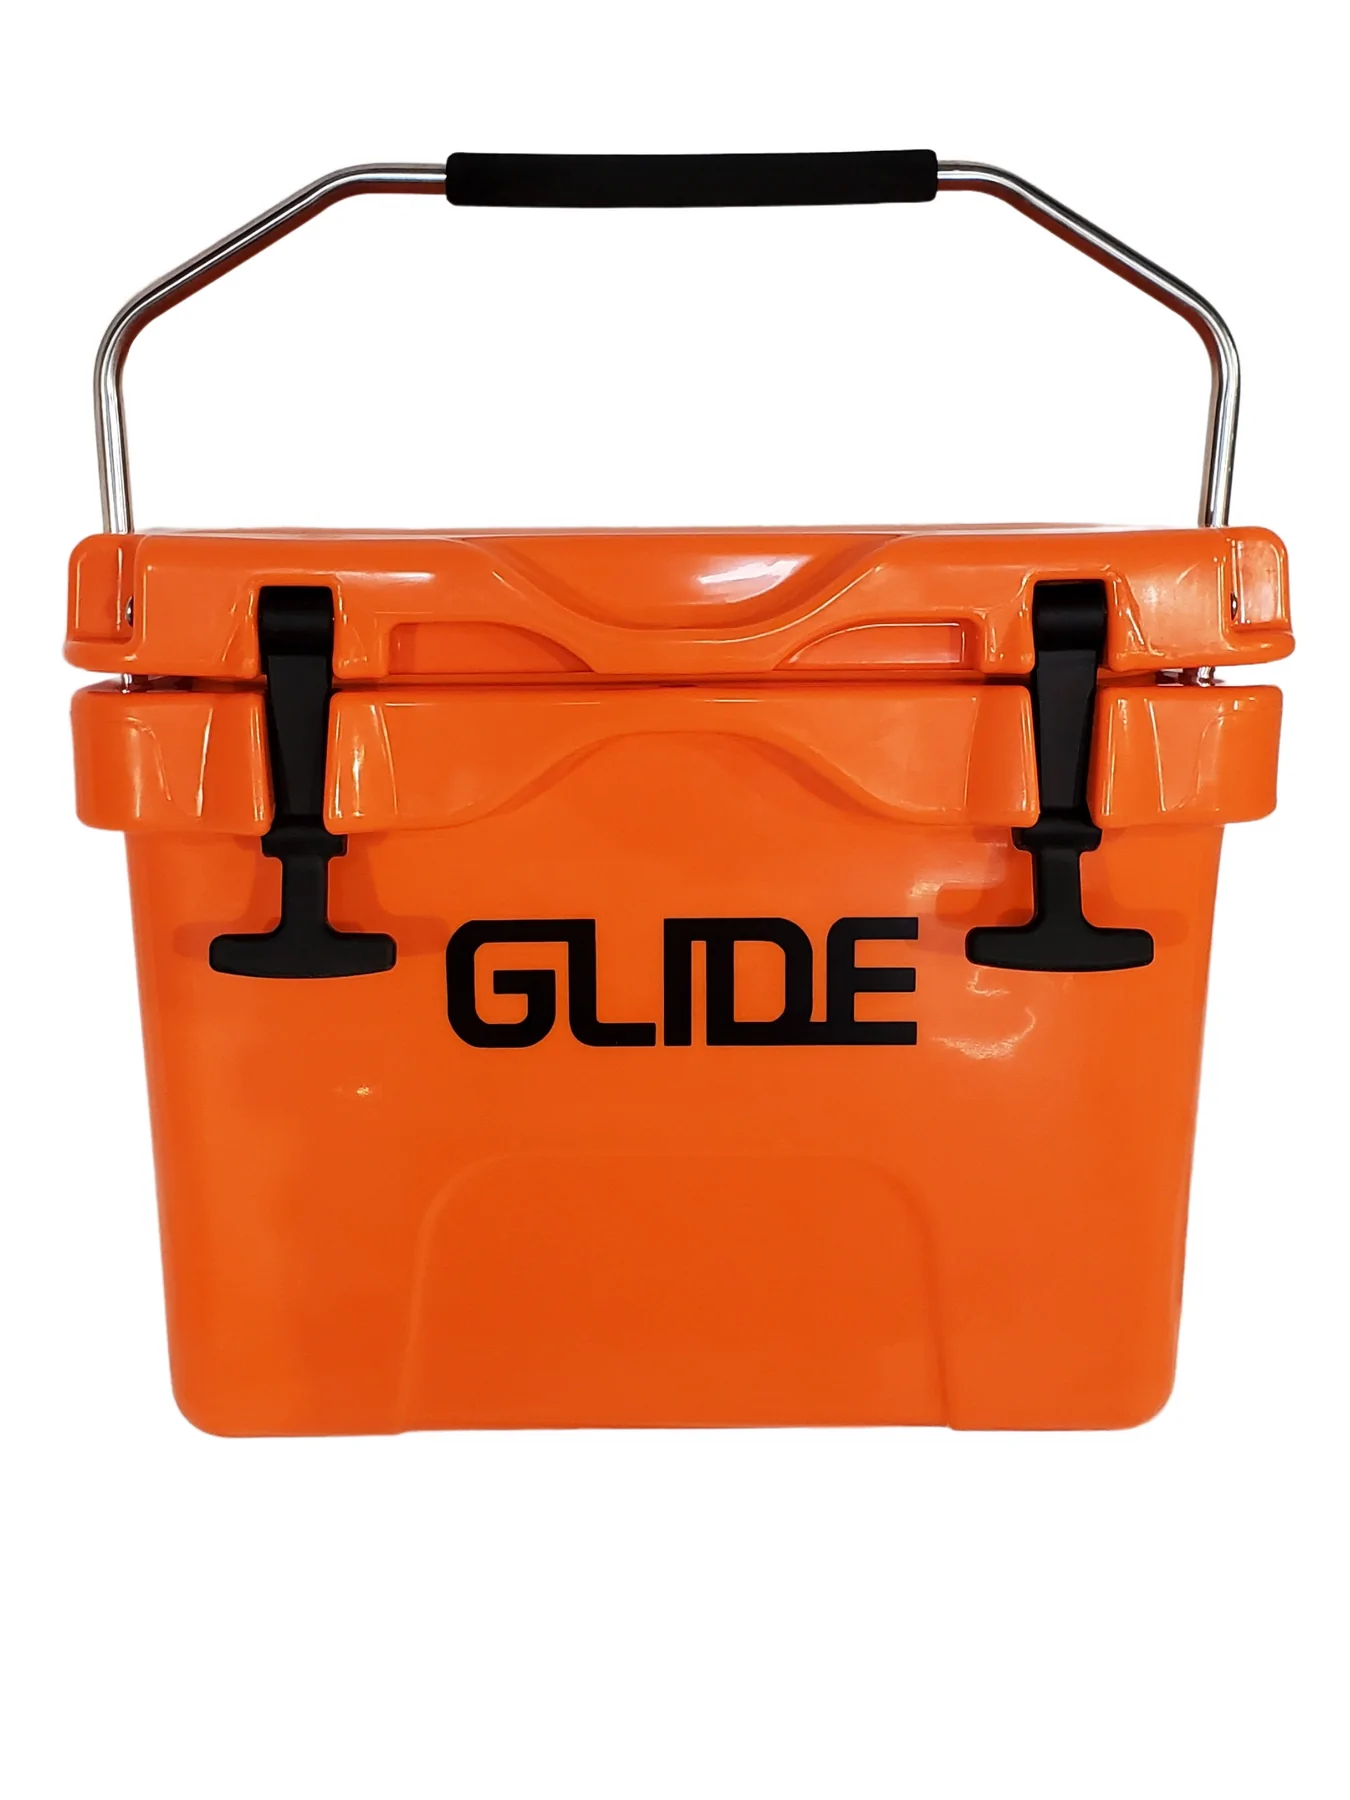 Glide fishing coolers are super stable with a comfortable metal rod handle that works great on any inflatable boards.